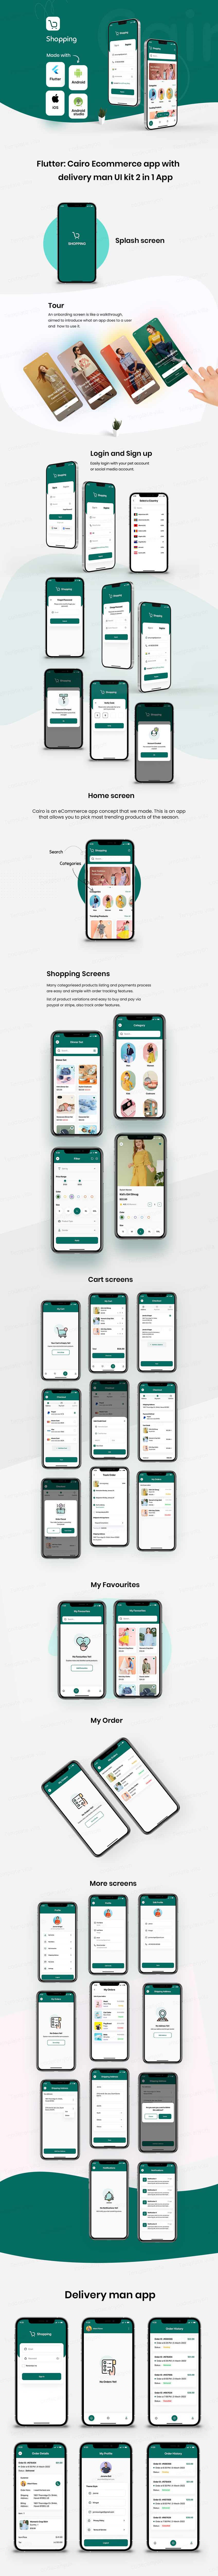 Flutter: Cairo Ecommerce app with delivery man UI 2 in 1 App + Android app + IOS app Template - 4